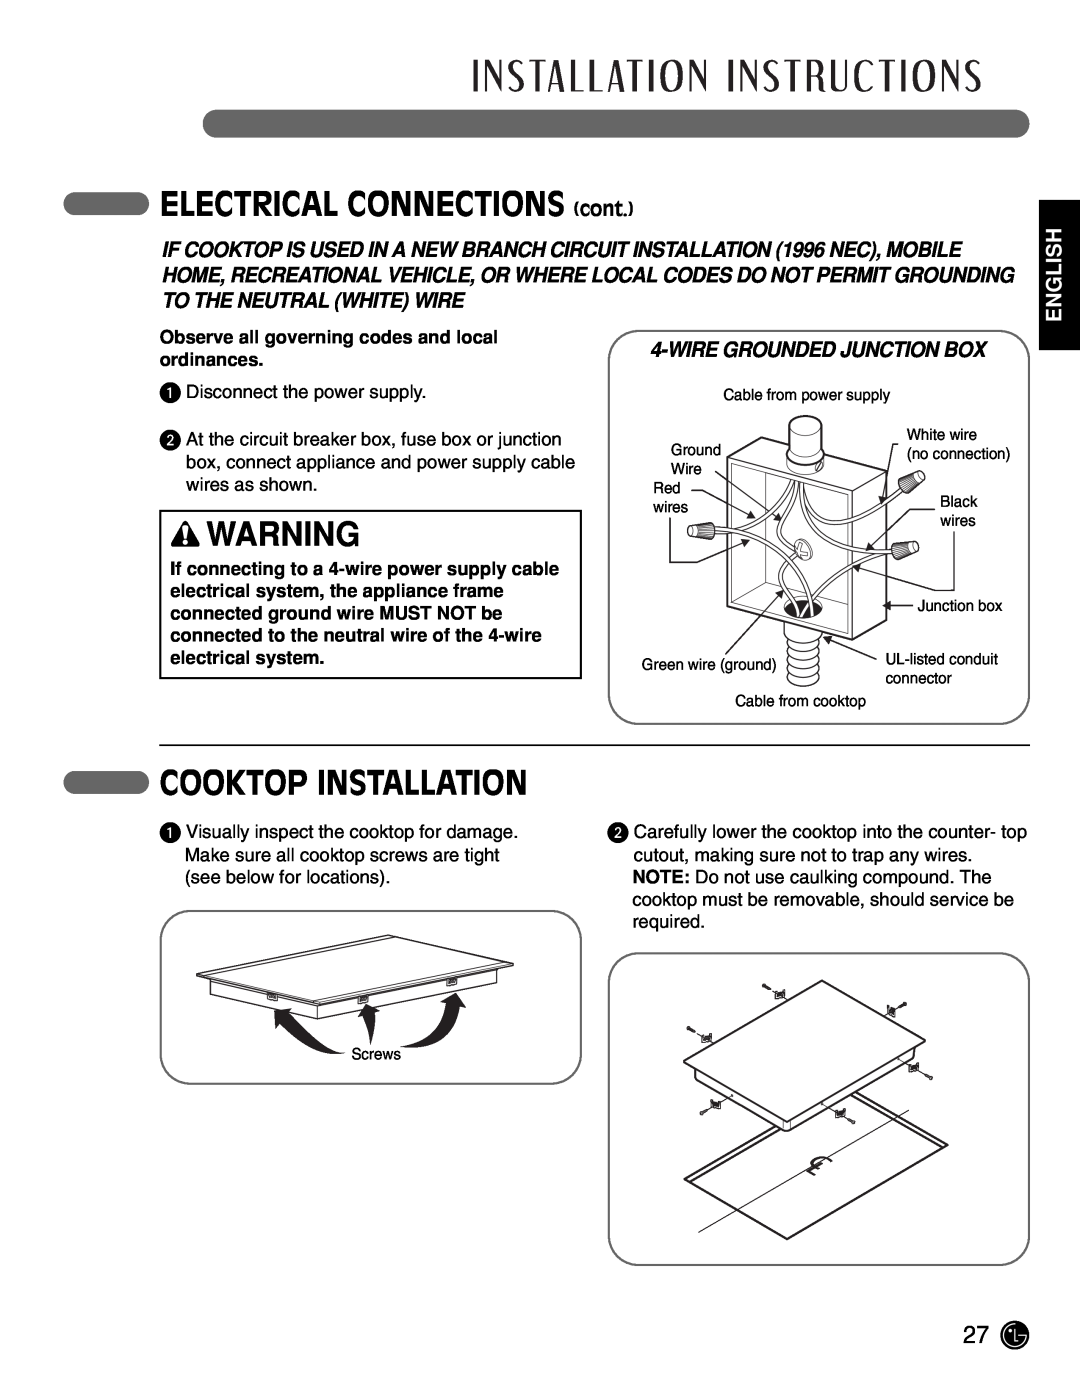 LG Electronics LCE3081ST, LCE3681ST Cooktop Installation, Wire Grounded Junction Box, ELECTRICAL CONNECTIONS cont, English 